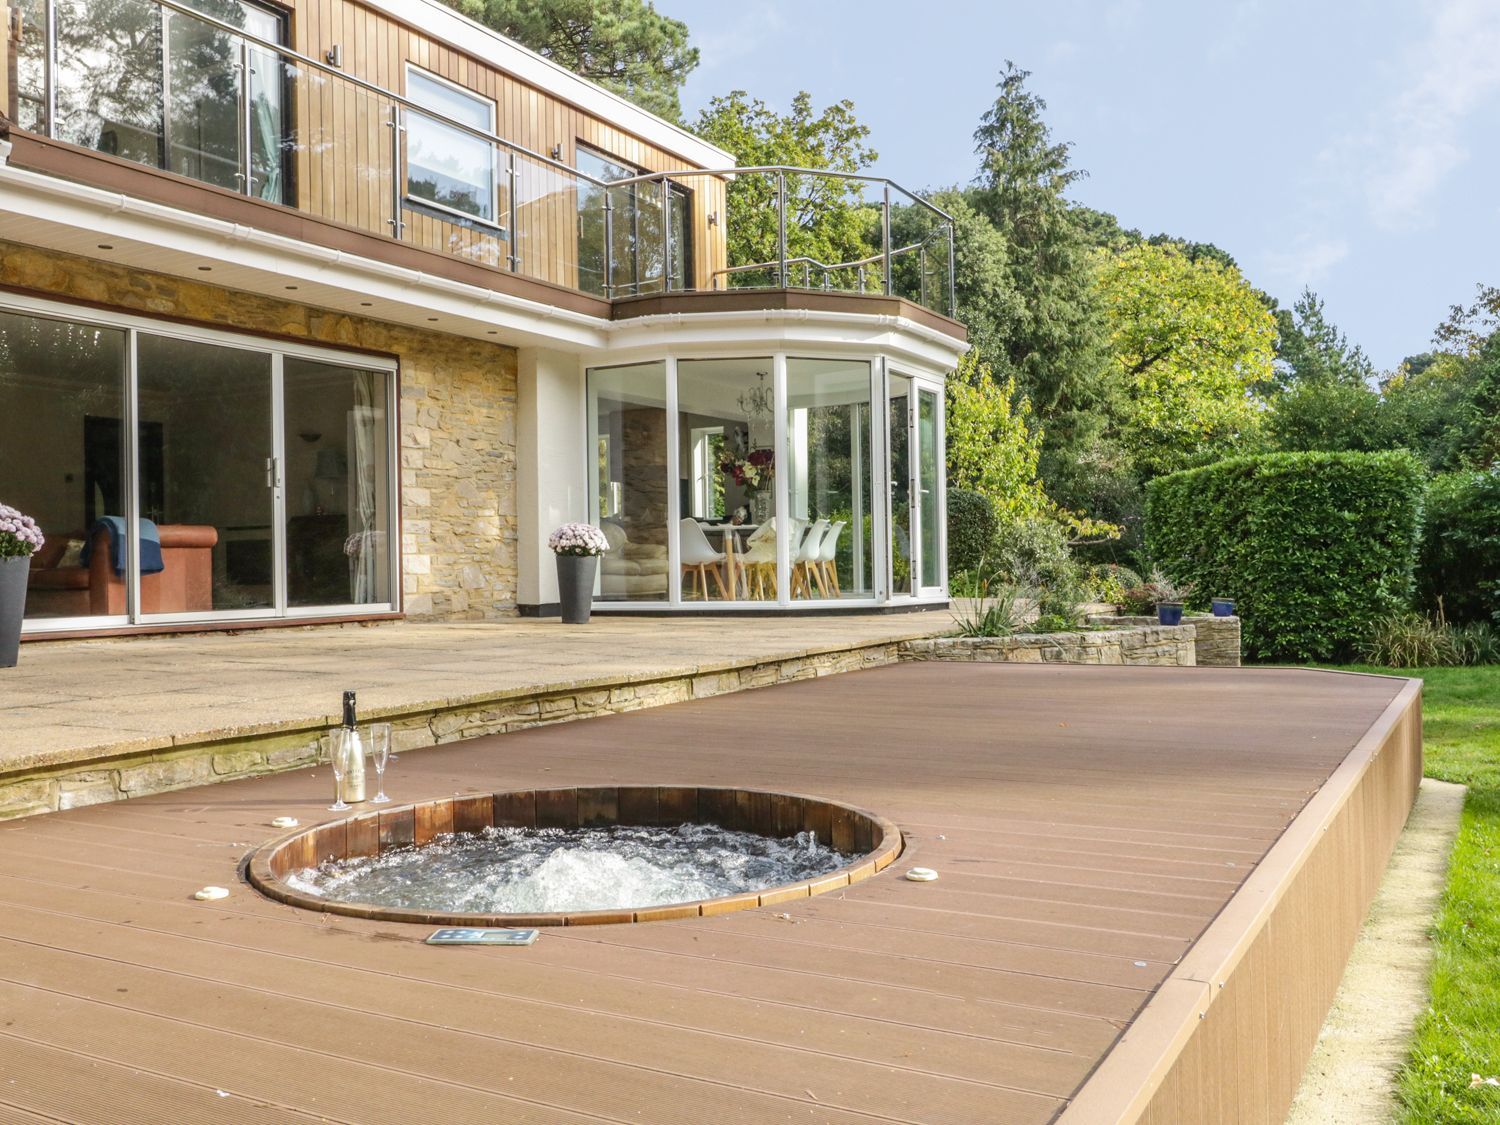 Branksome Wood House in Poole, Dorset. Close to amenities. Indoor swimming pool. Hot tub. Woodburner